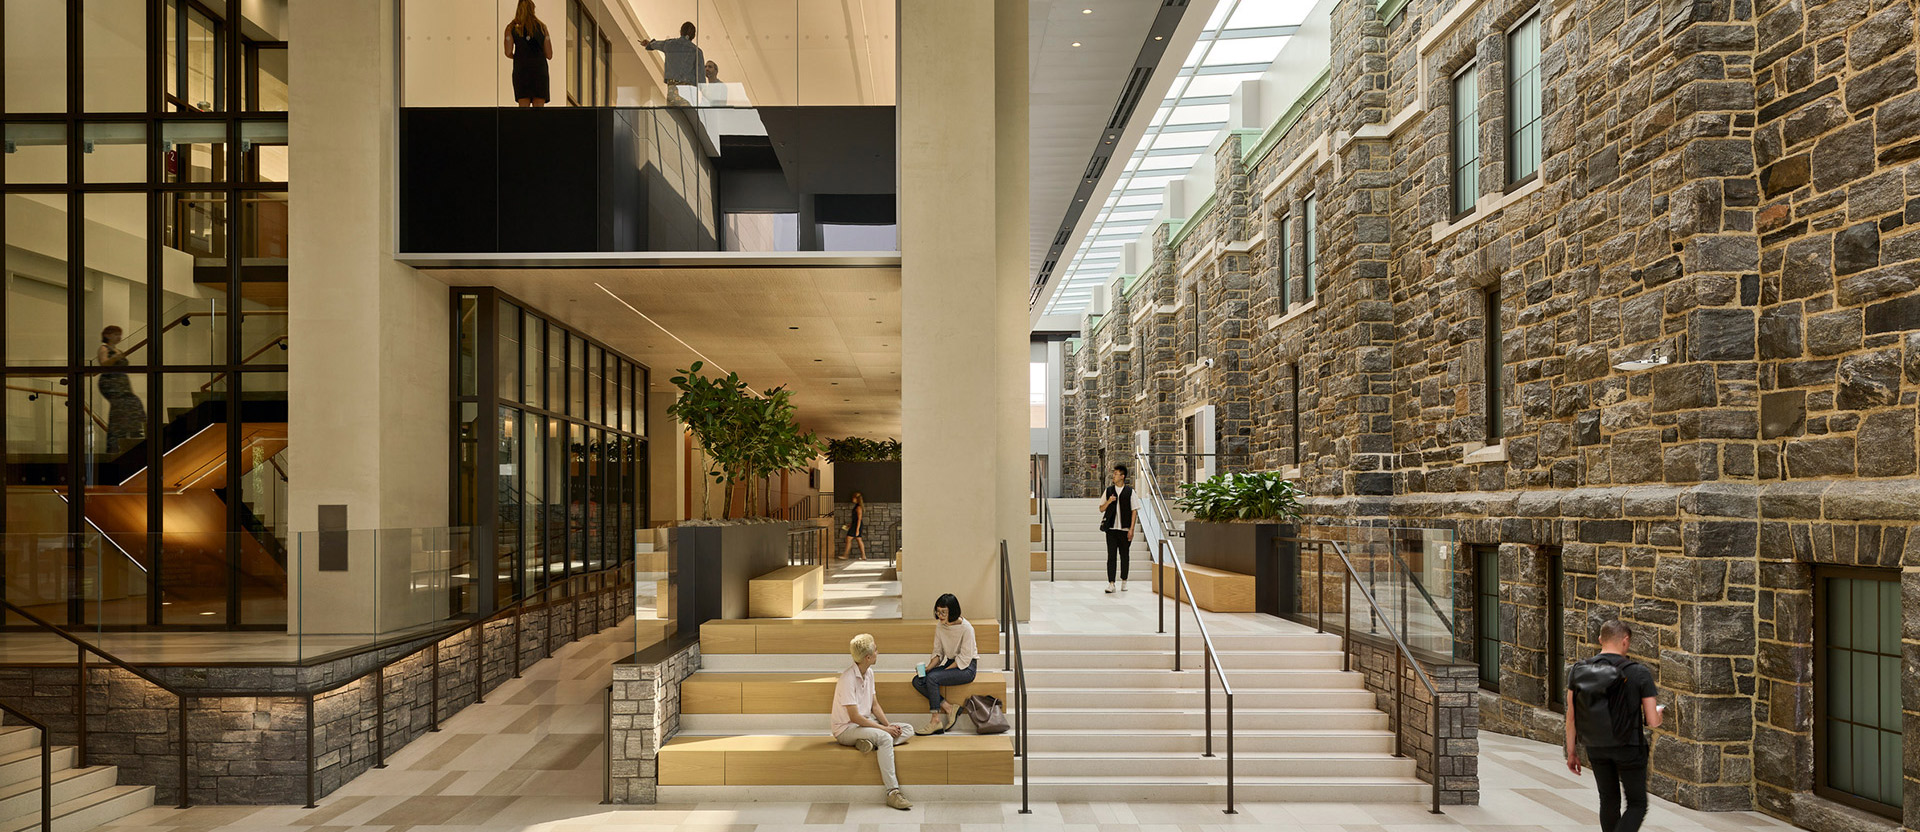 Modern interior juxtaposing historical stone walls with glass partitions, sleek black metal frames, and a sunlit atrium. Elegantly crafted stairs and tiered seating areas facilitate flow and interaction, complemented by geometric floor patterns that enhance the space's contemporary yet timeless ambiance.